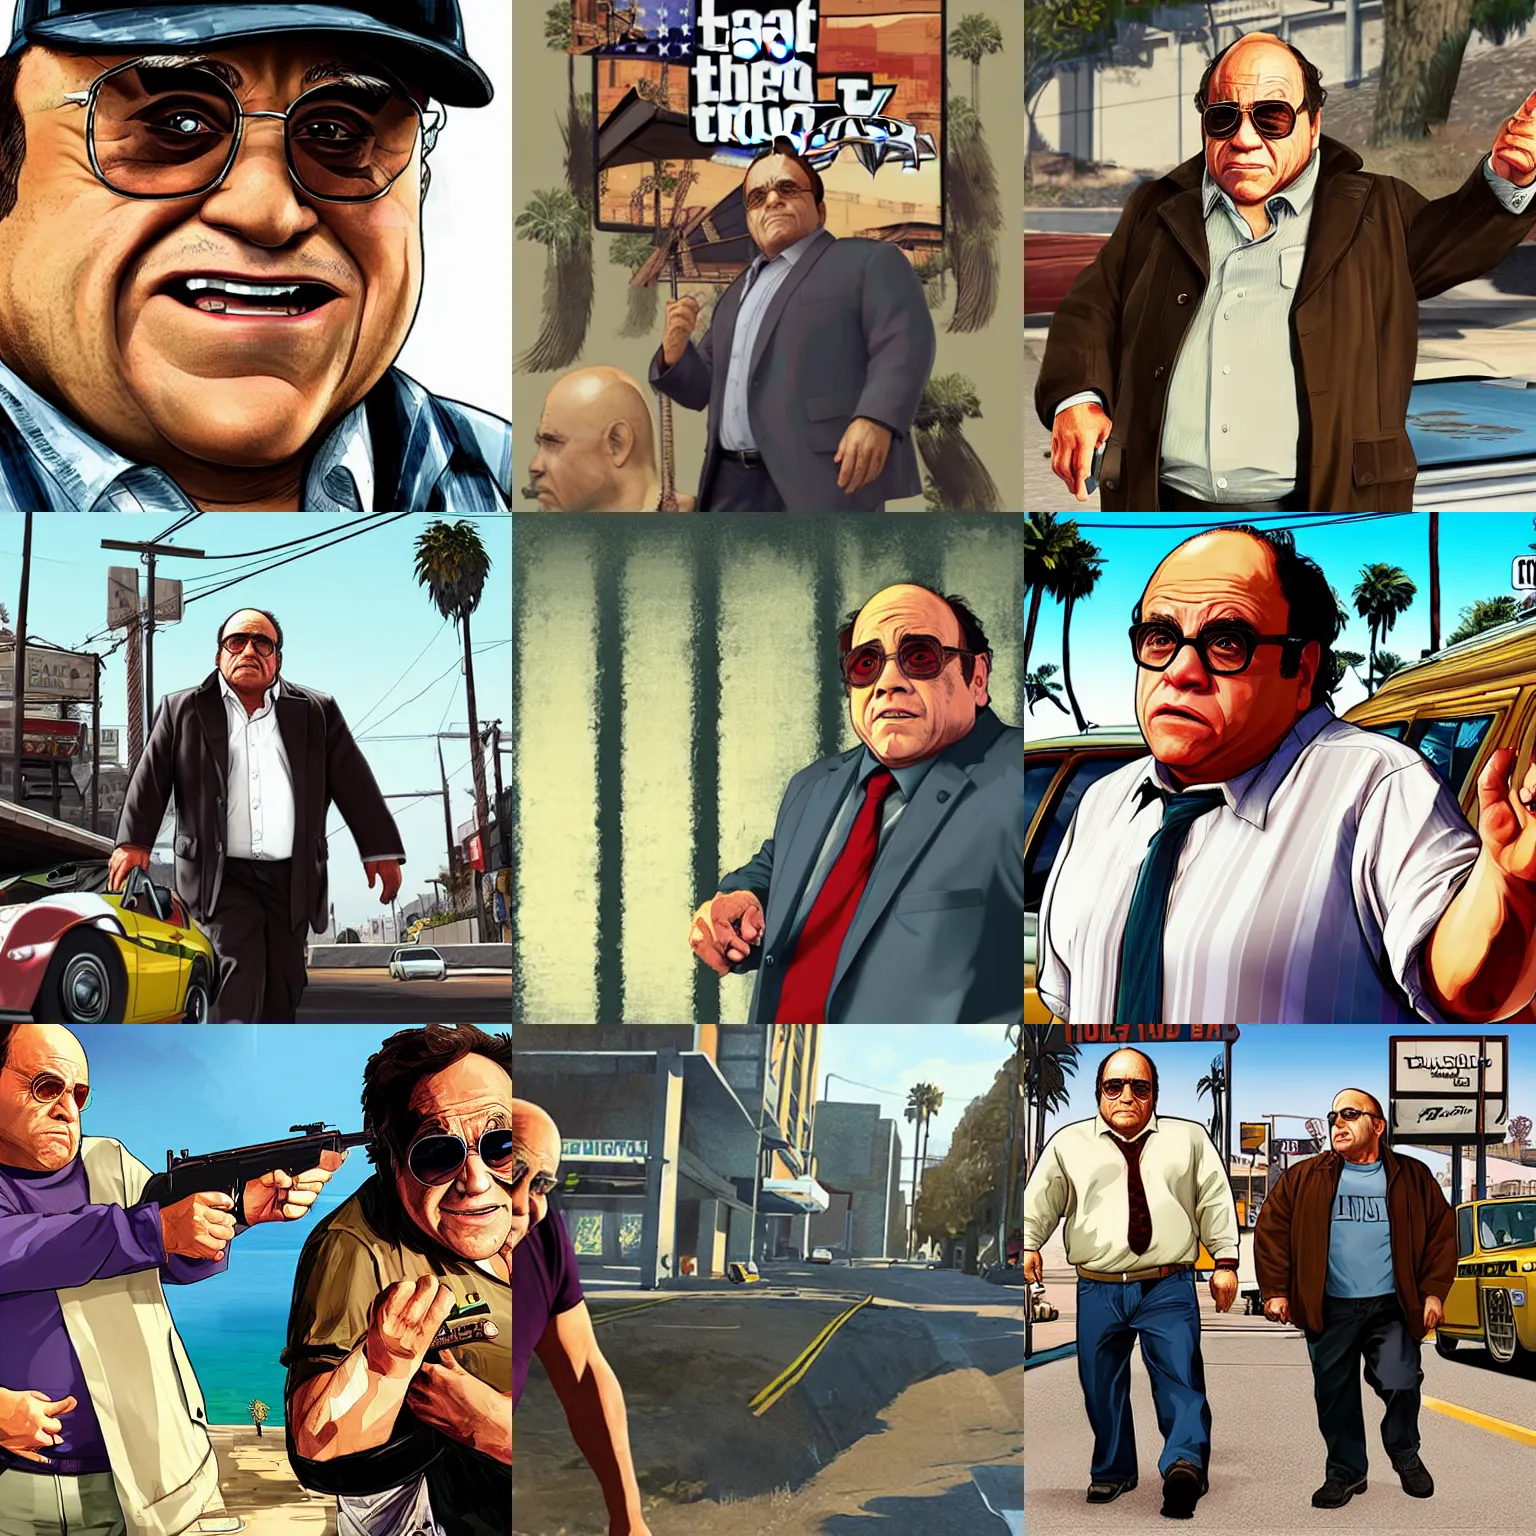 Prompt: danny devito in gta v, promotional art by stephen bliss, no text